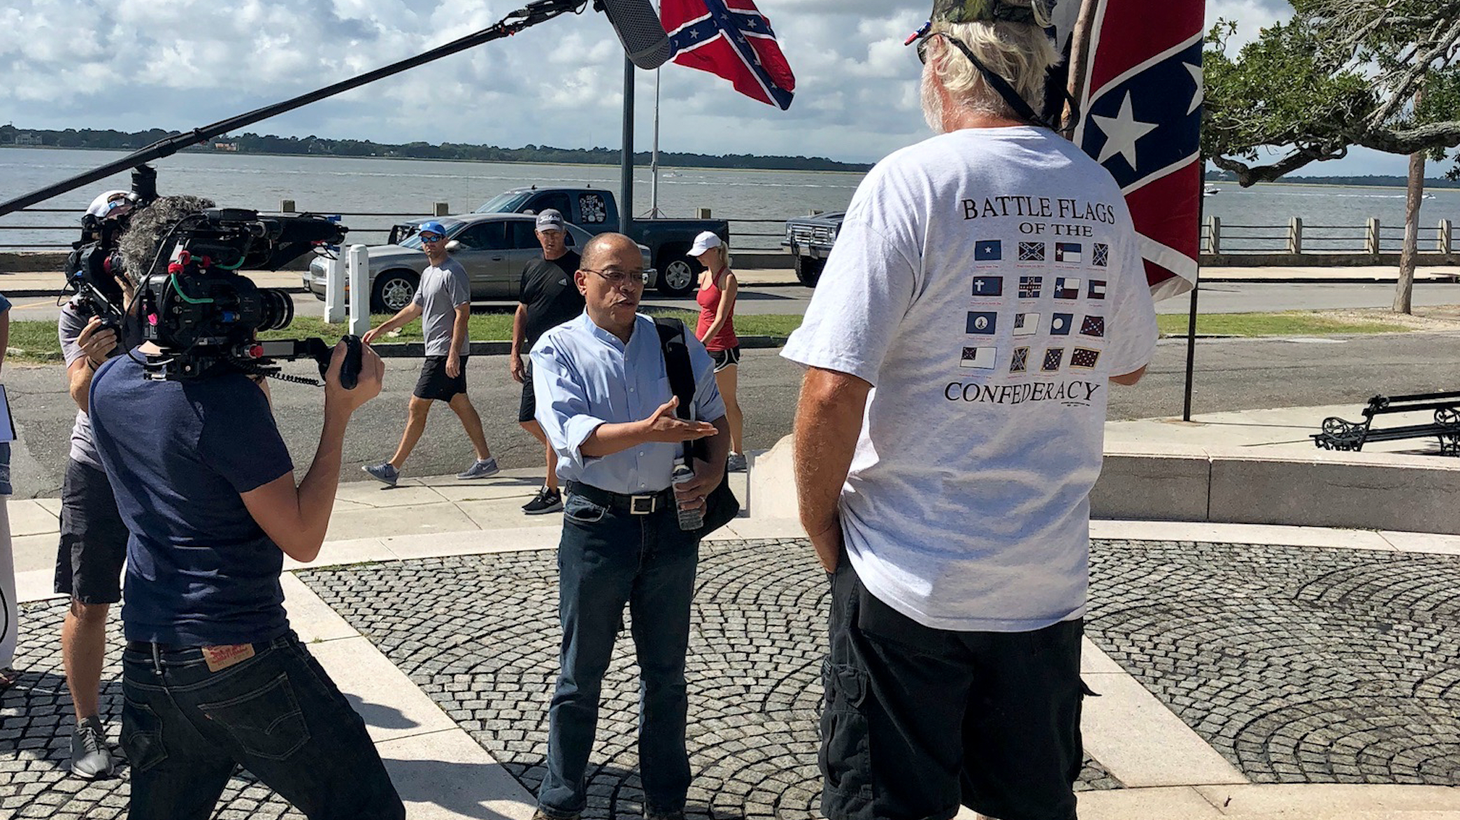 Jeffery Robinson talks with Confederate flag defender Braxton Spivey at a monument near Fort Sumter in Charleston, South Carolina. Photo by Sarah Kunstler.